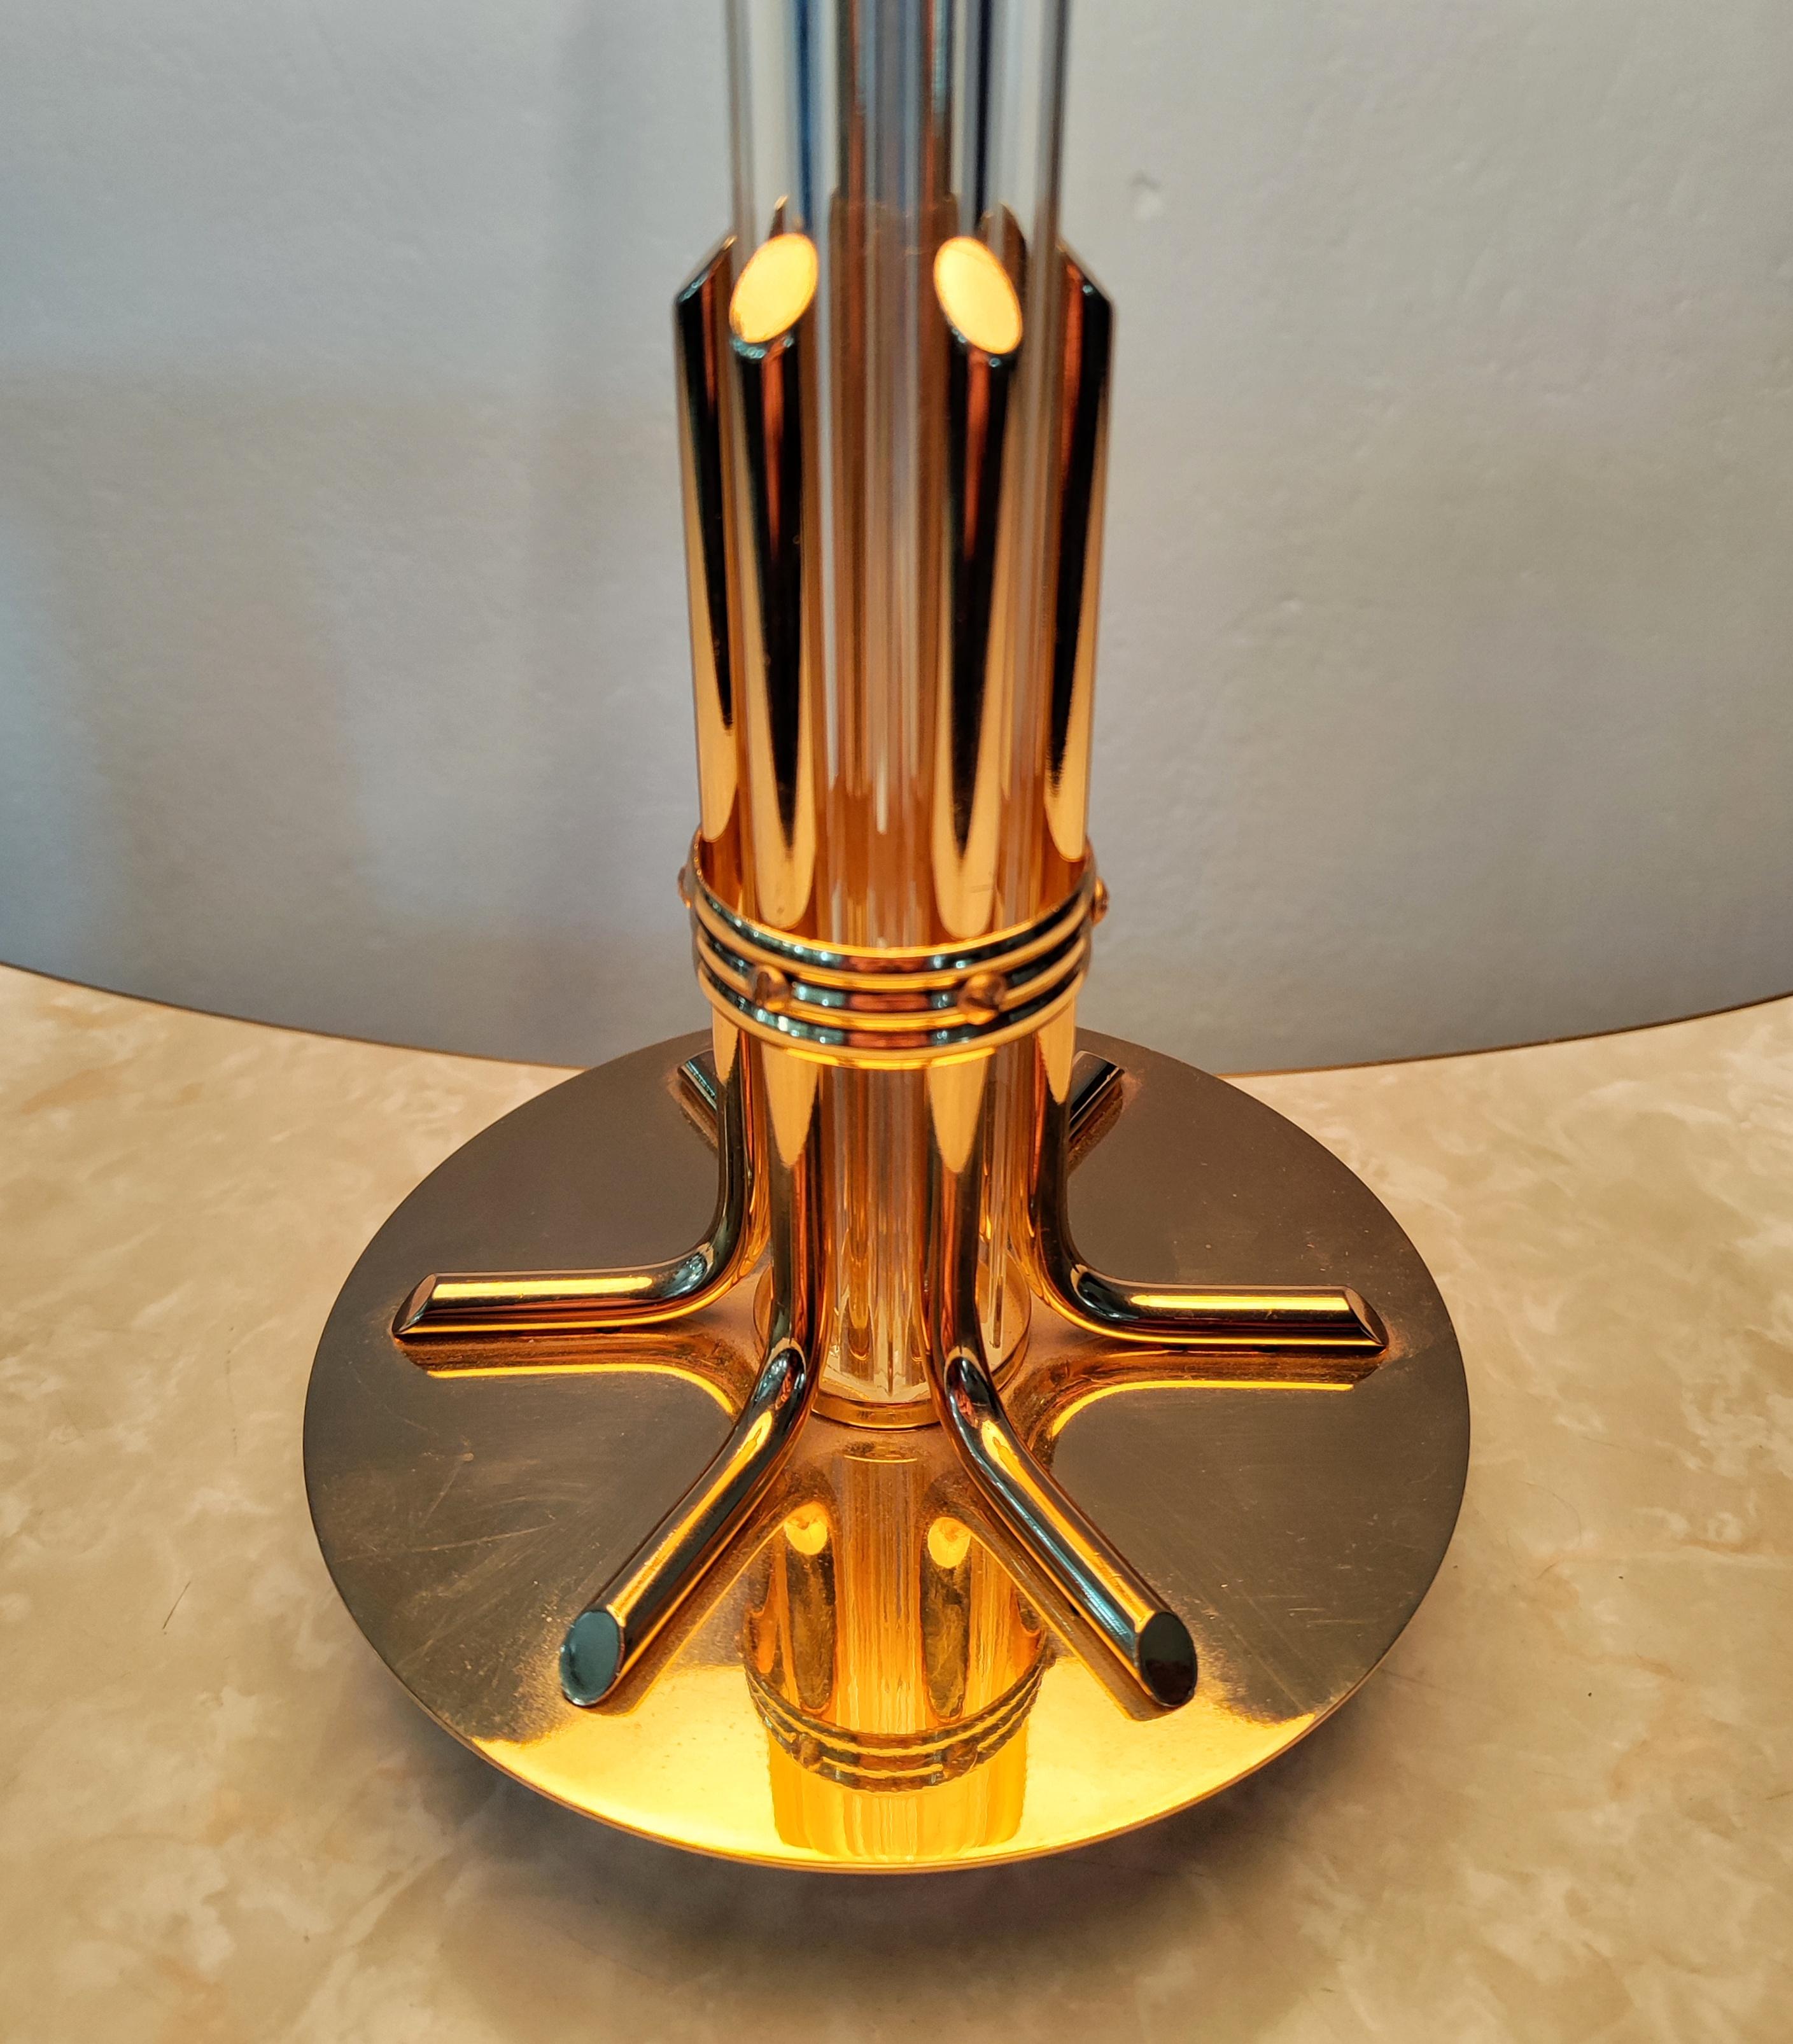 Late 20th Century Hollywood Regency Table Lamp in Brass and Lucite, Solken Leuchten, Germany 1970s